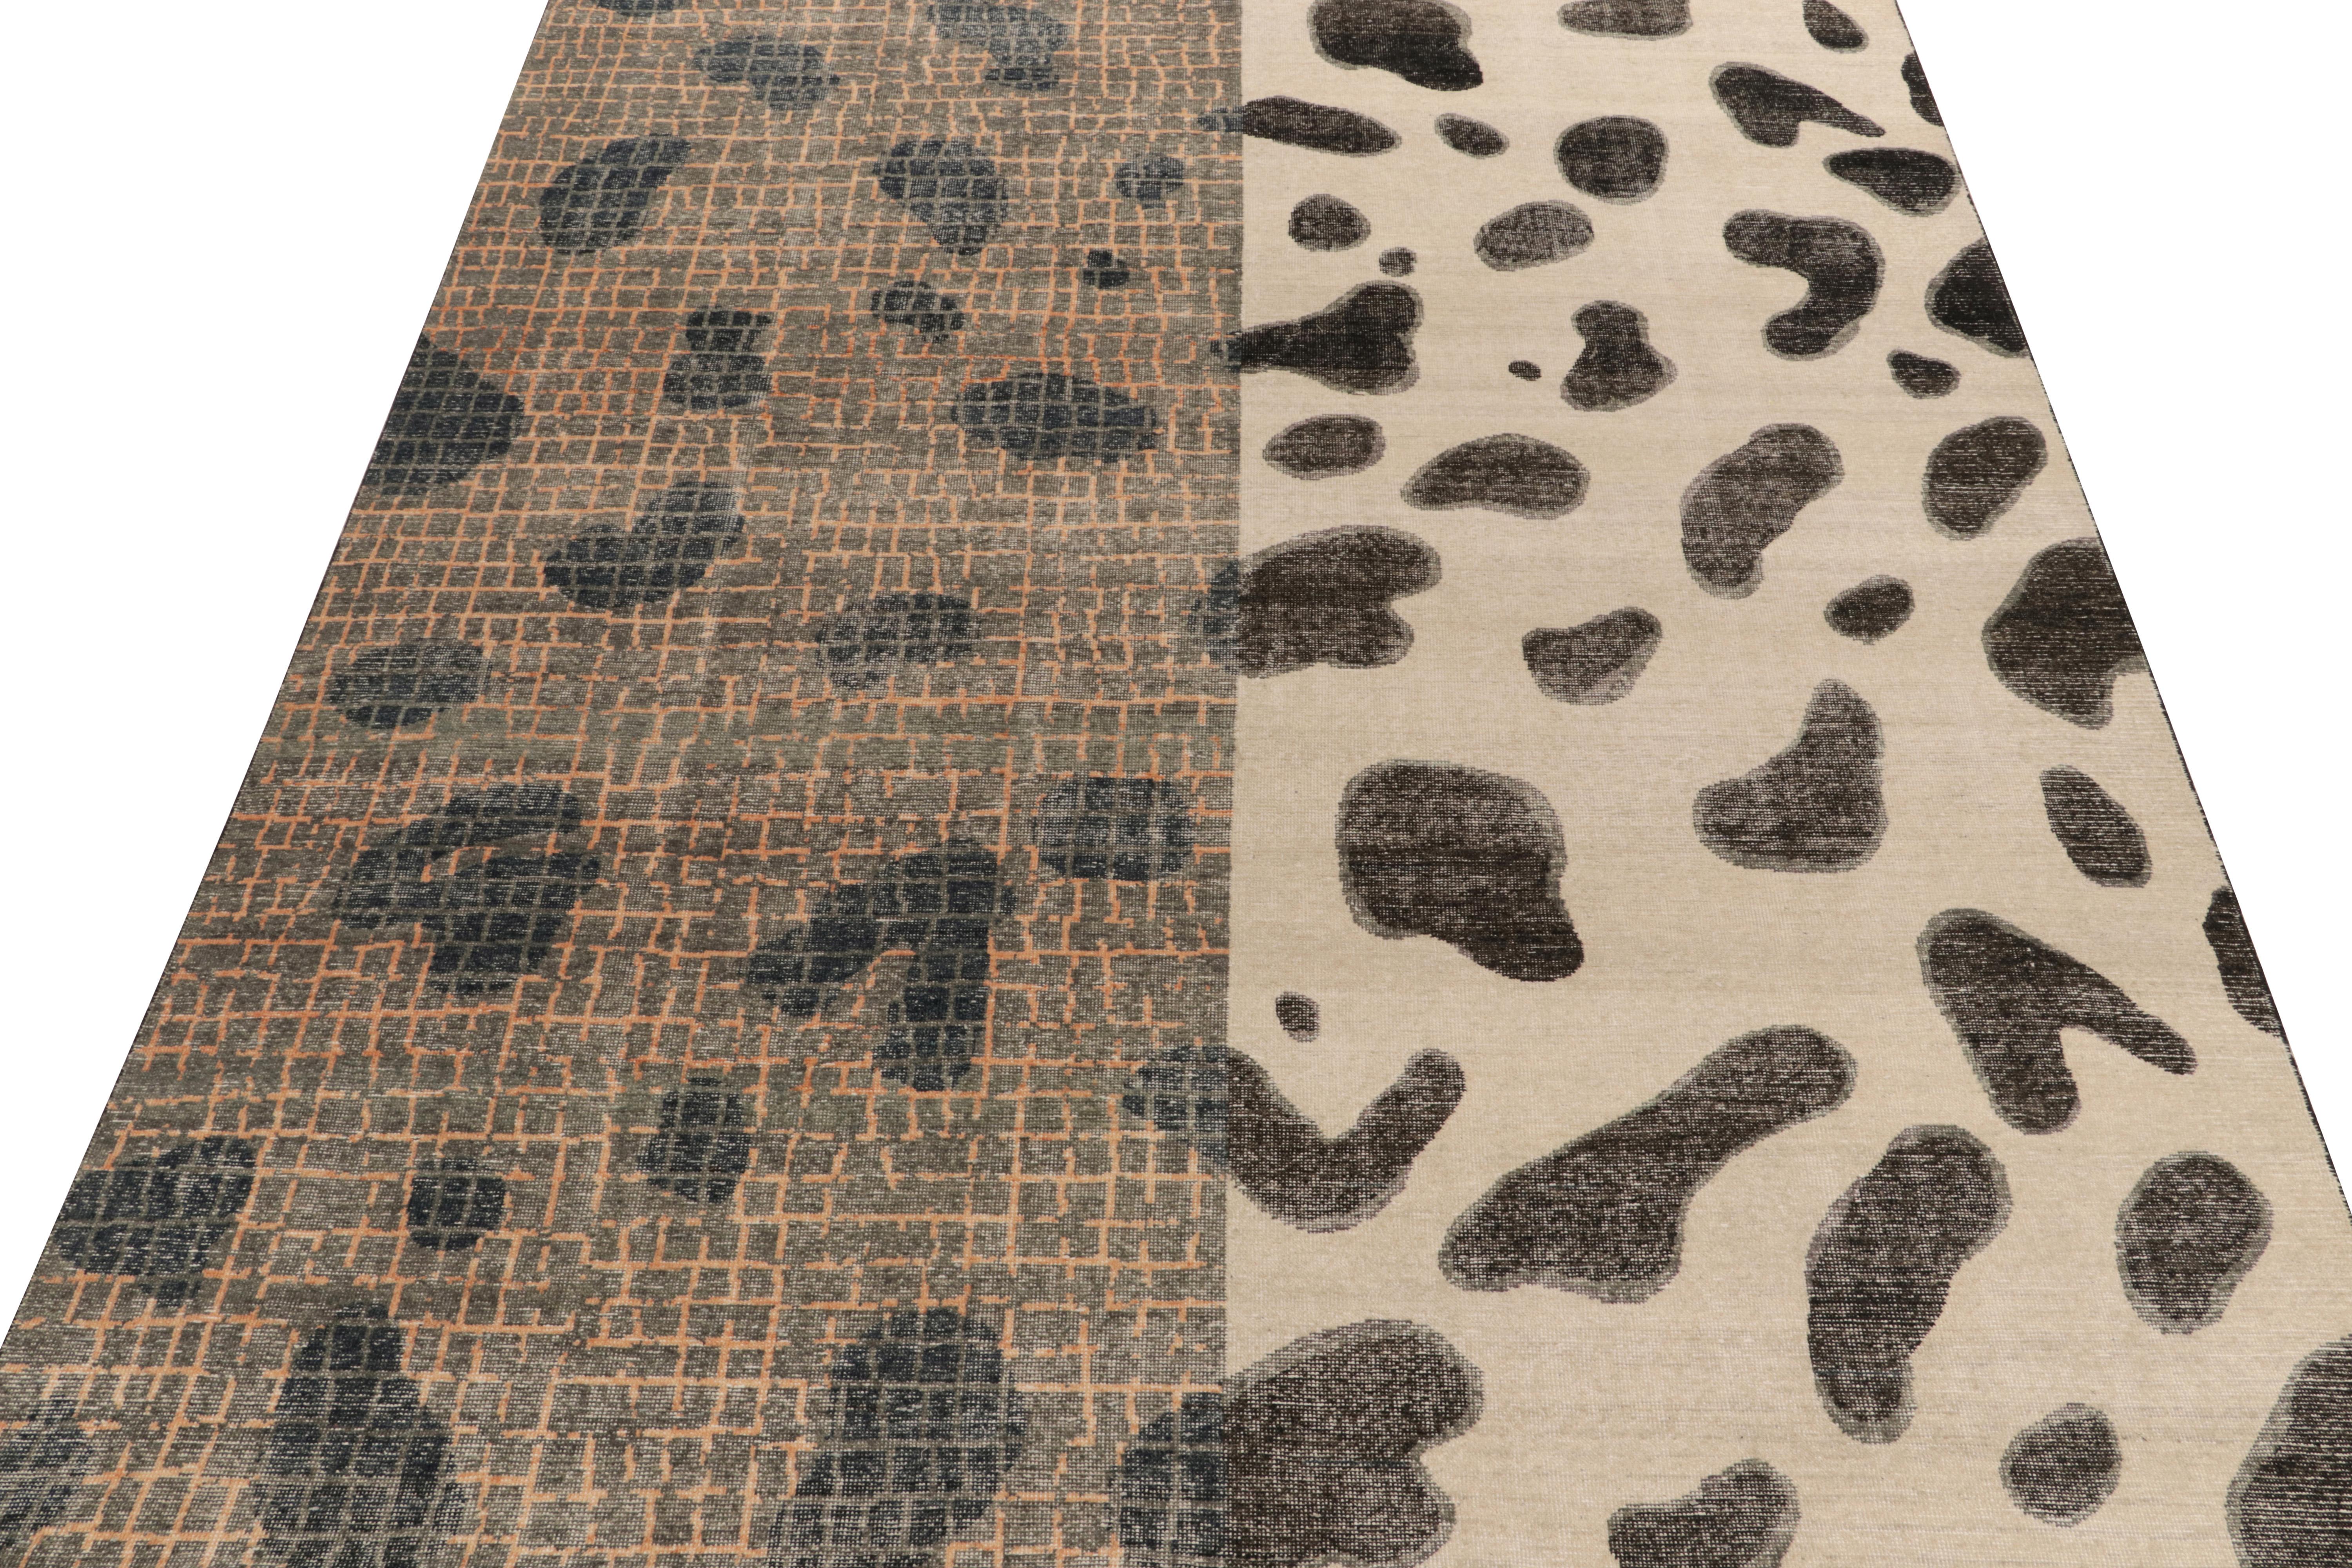 Bearing dashing abstract aesthetics with a Deco vibe, a unique 9 x 12 piece from Rug & Kilim’s Homage collection. The modern vision relishes a chic colorway of beige, brown & black with orange accents perfectly complementing the element of textural